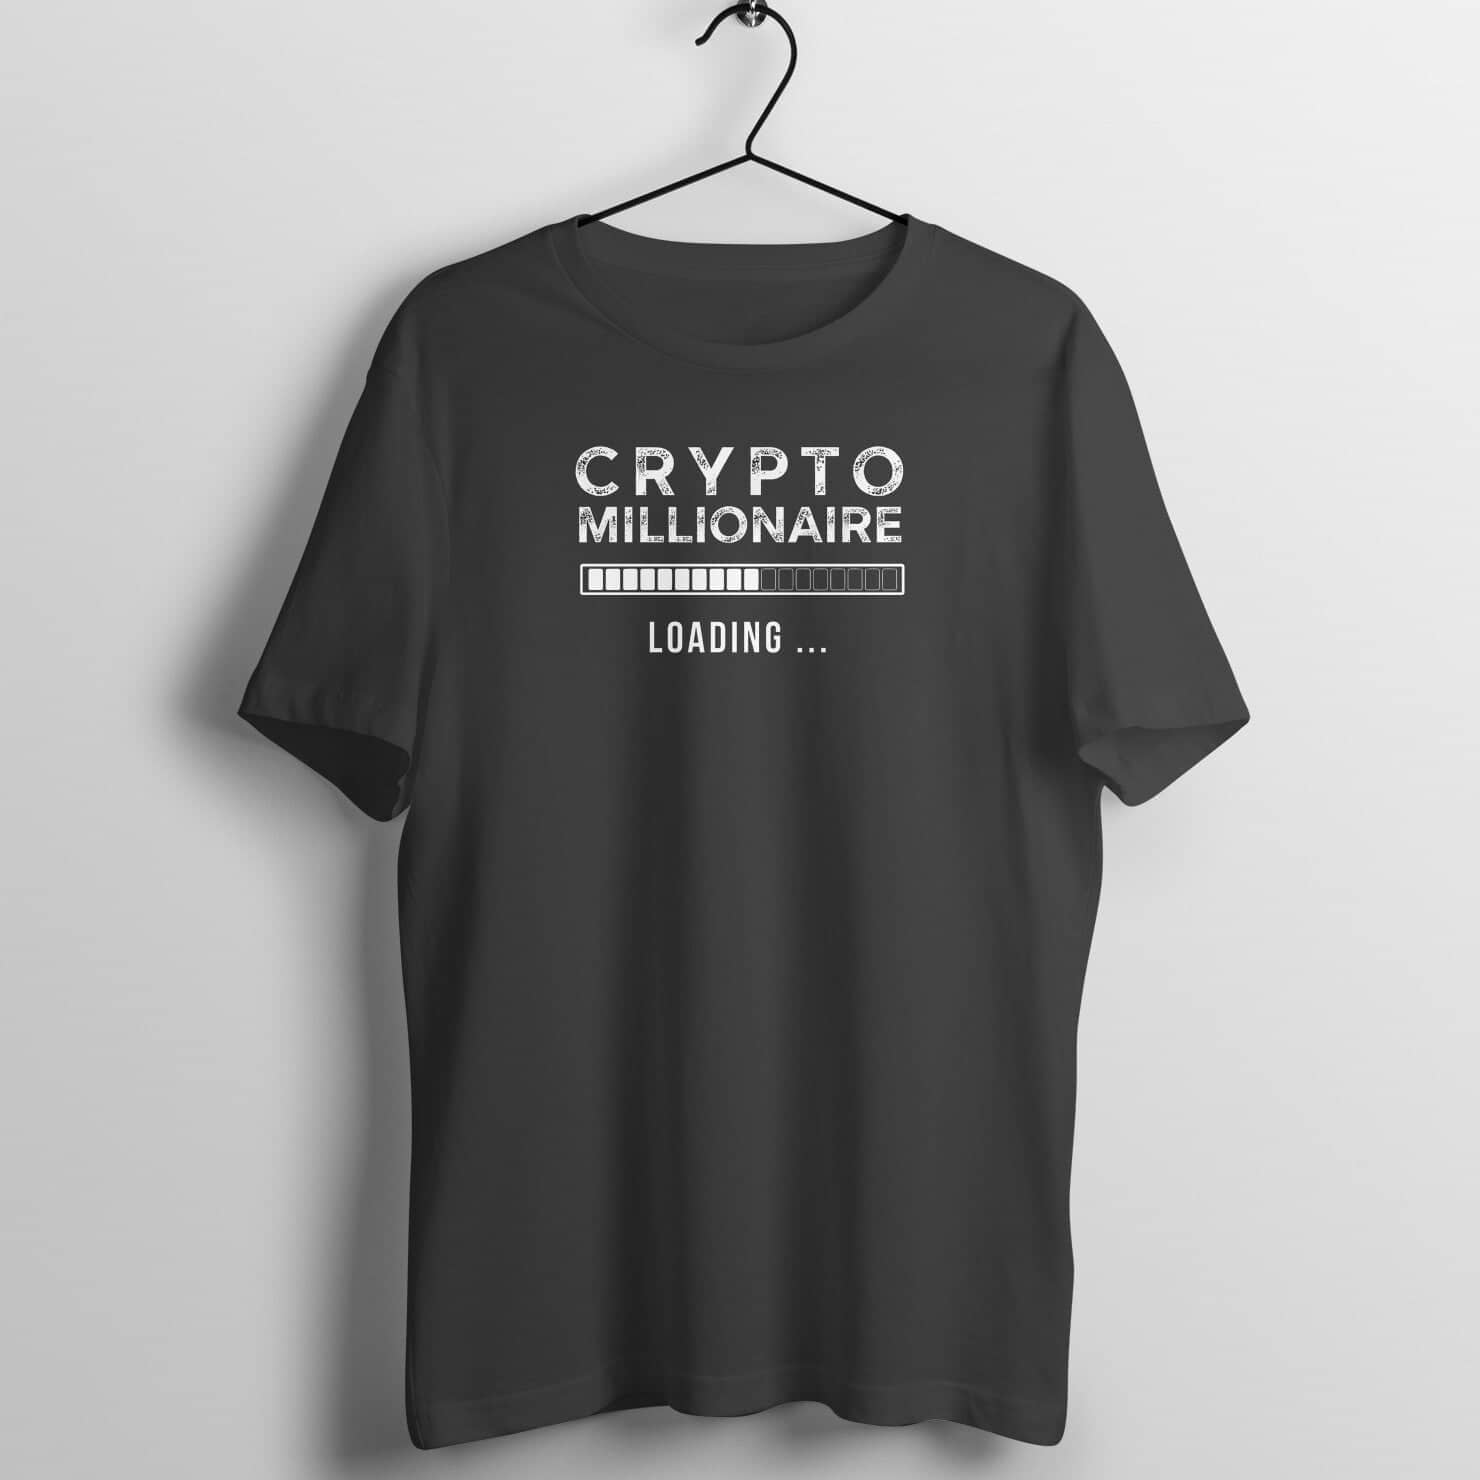 Crypto Millionaire Loading Exclusive Black T Shirt for Men and Women freeshipping - Catch My Drift India